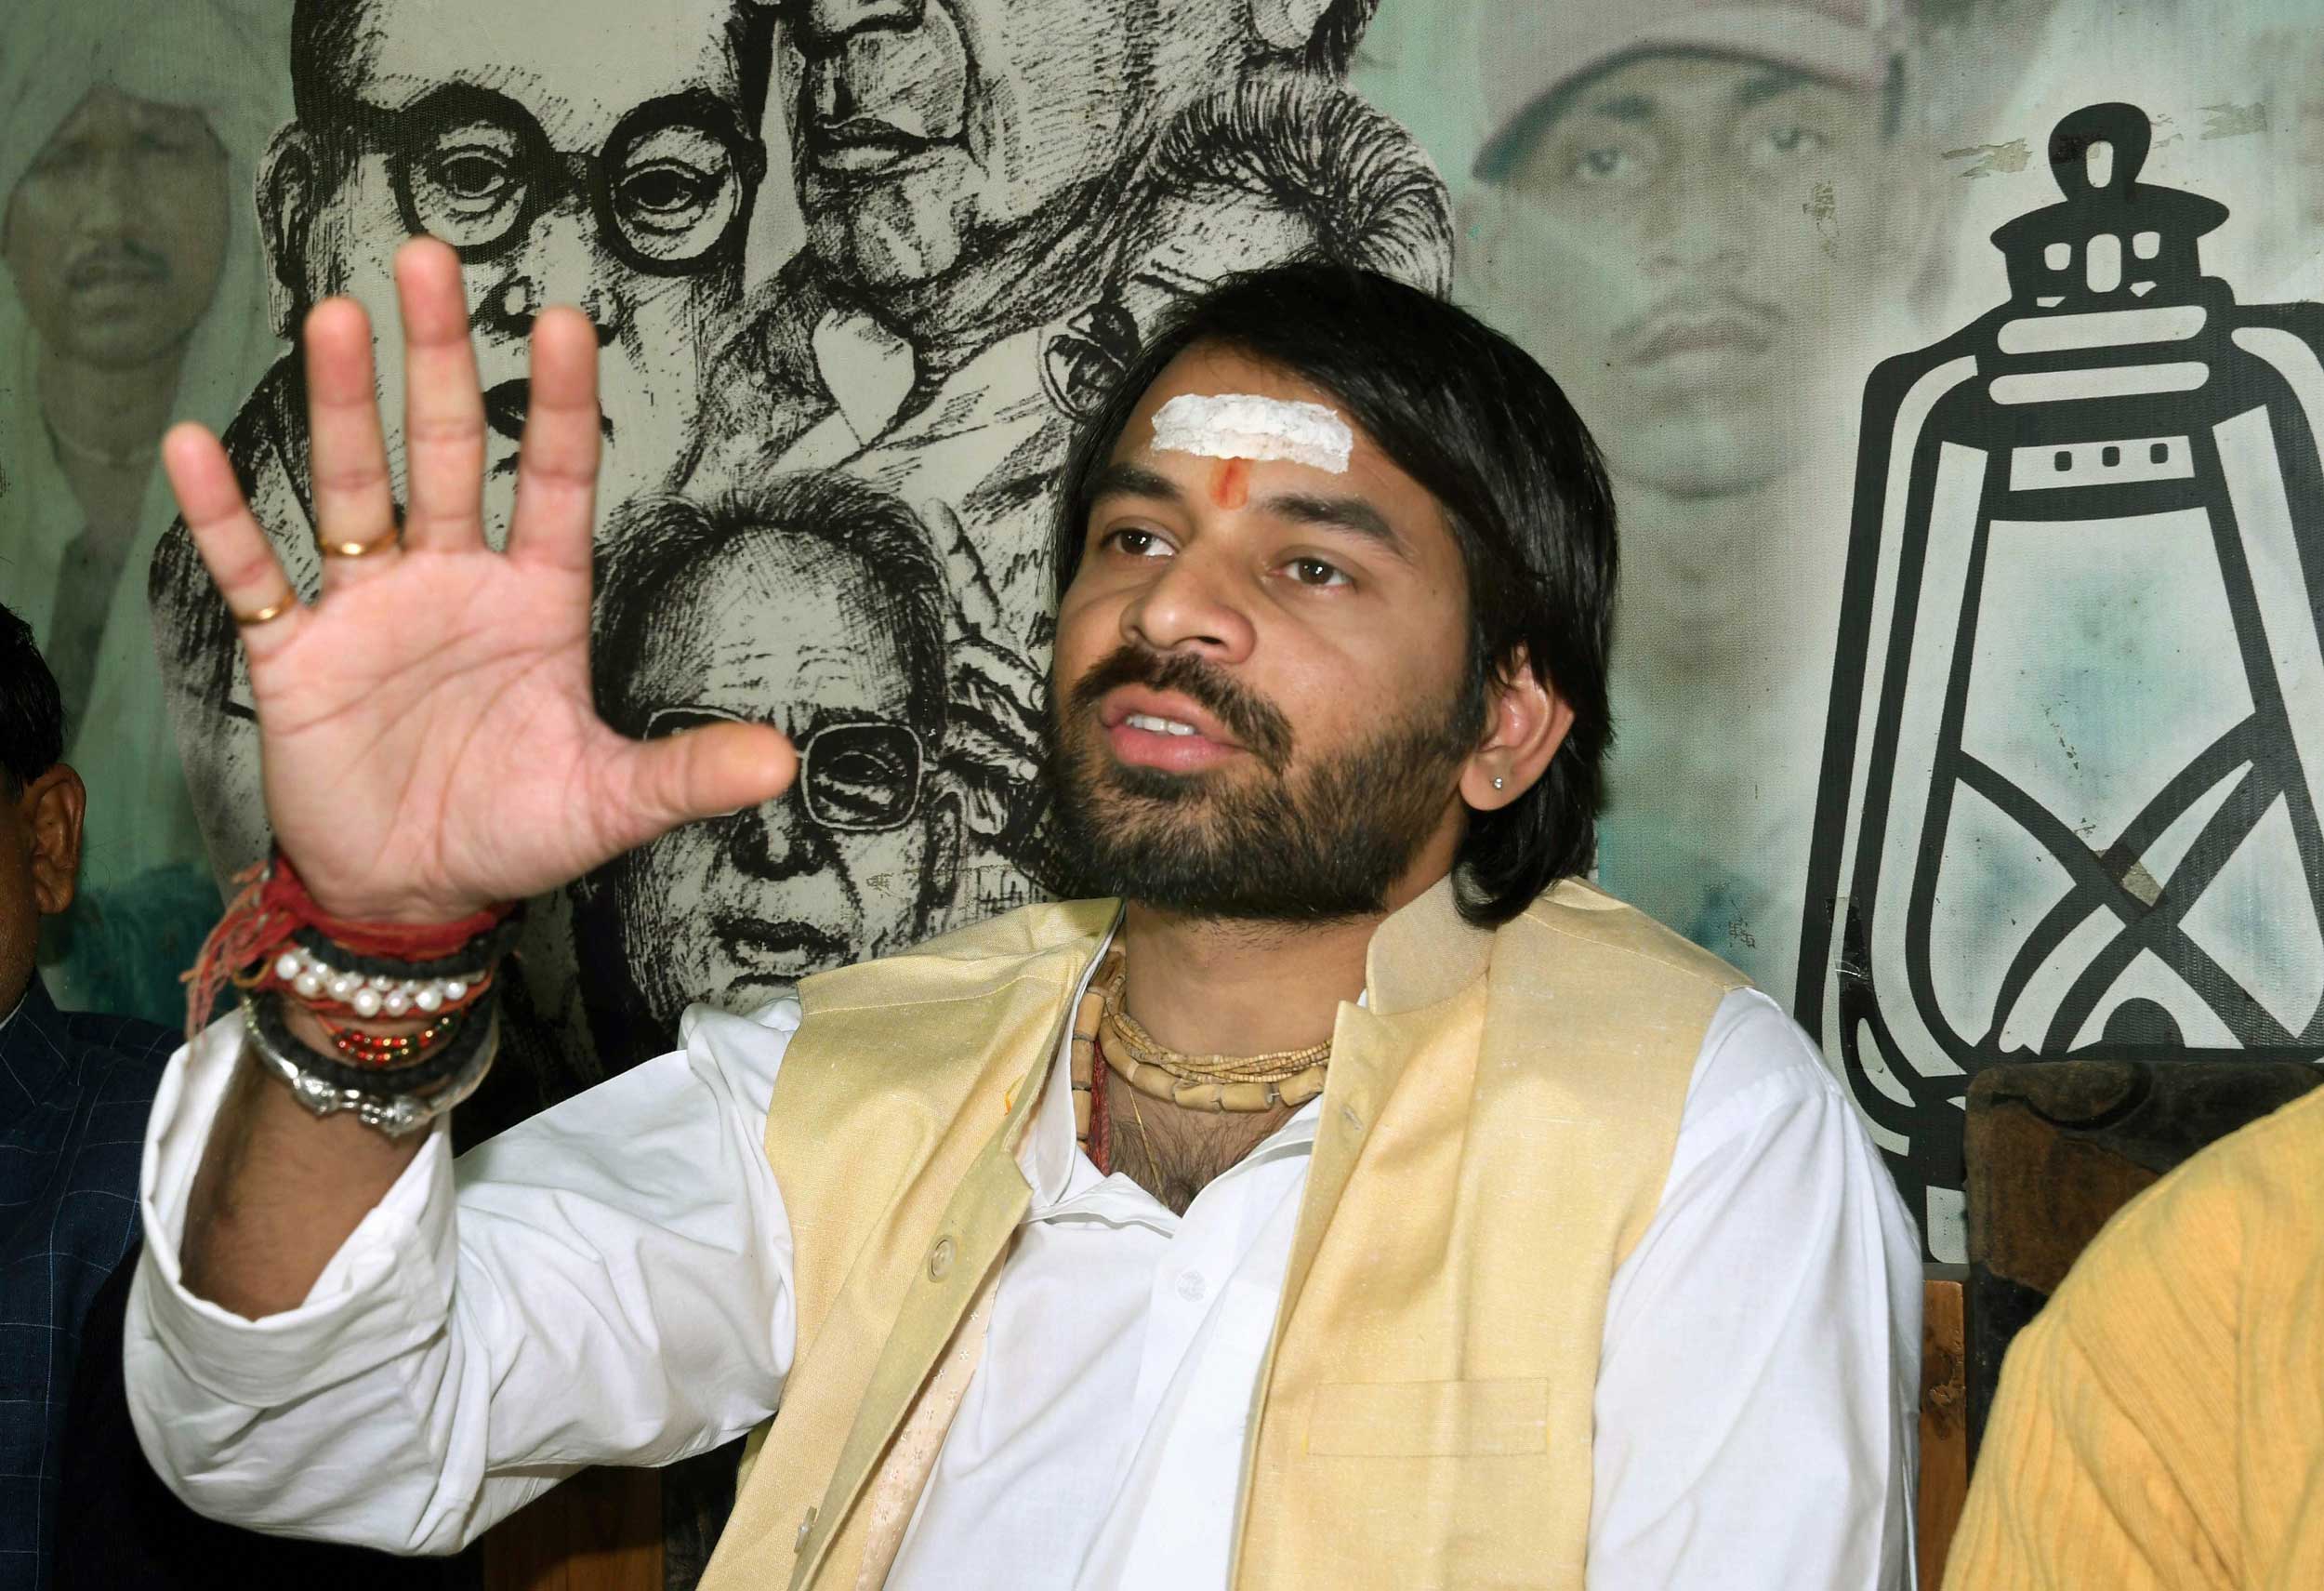 Tej turns up in RJD office for ‘Sangh fight’